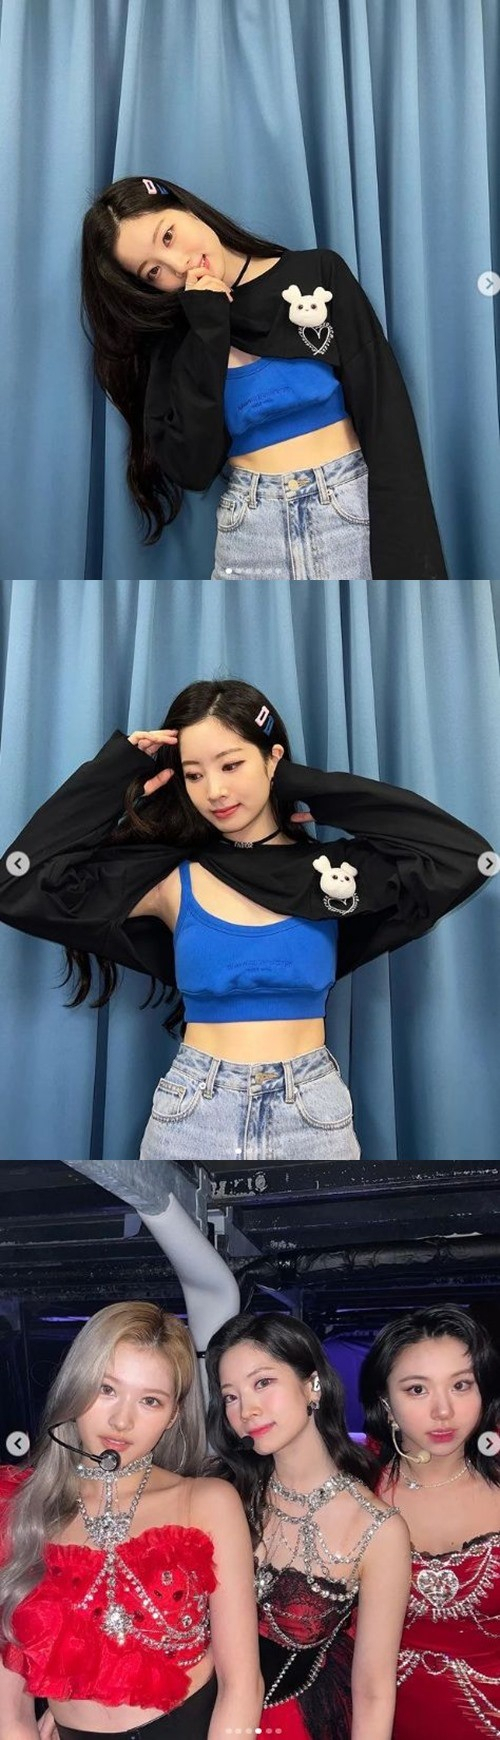 TWICE Dahyun has released a cute yet unconventional recent photo.On the 26th, TWICE official Instagram showed several photos of the members, which led to the fans response.In the photo, Dahyun robbed his gaze at once in a bold fashion that reveals a narrow ant waist in a Bra top.In another photo, Dahyun appeared to pose affectionately with Sana and Chae Young, who were together at a Japanese concert.The fans who saw the photos responded in various ways such as I am strong from morning, TWICE friendship, eternal, I was surprised to know that I was wearing only underwear.